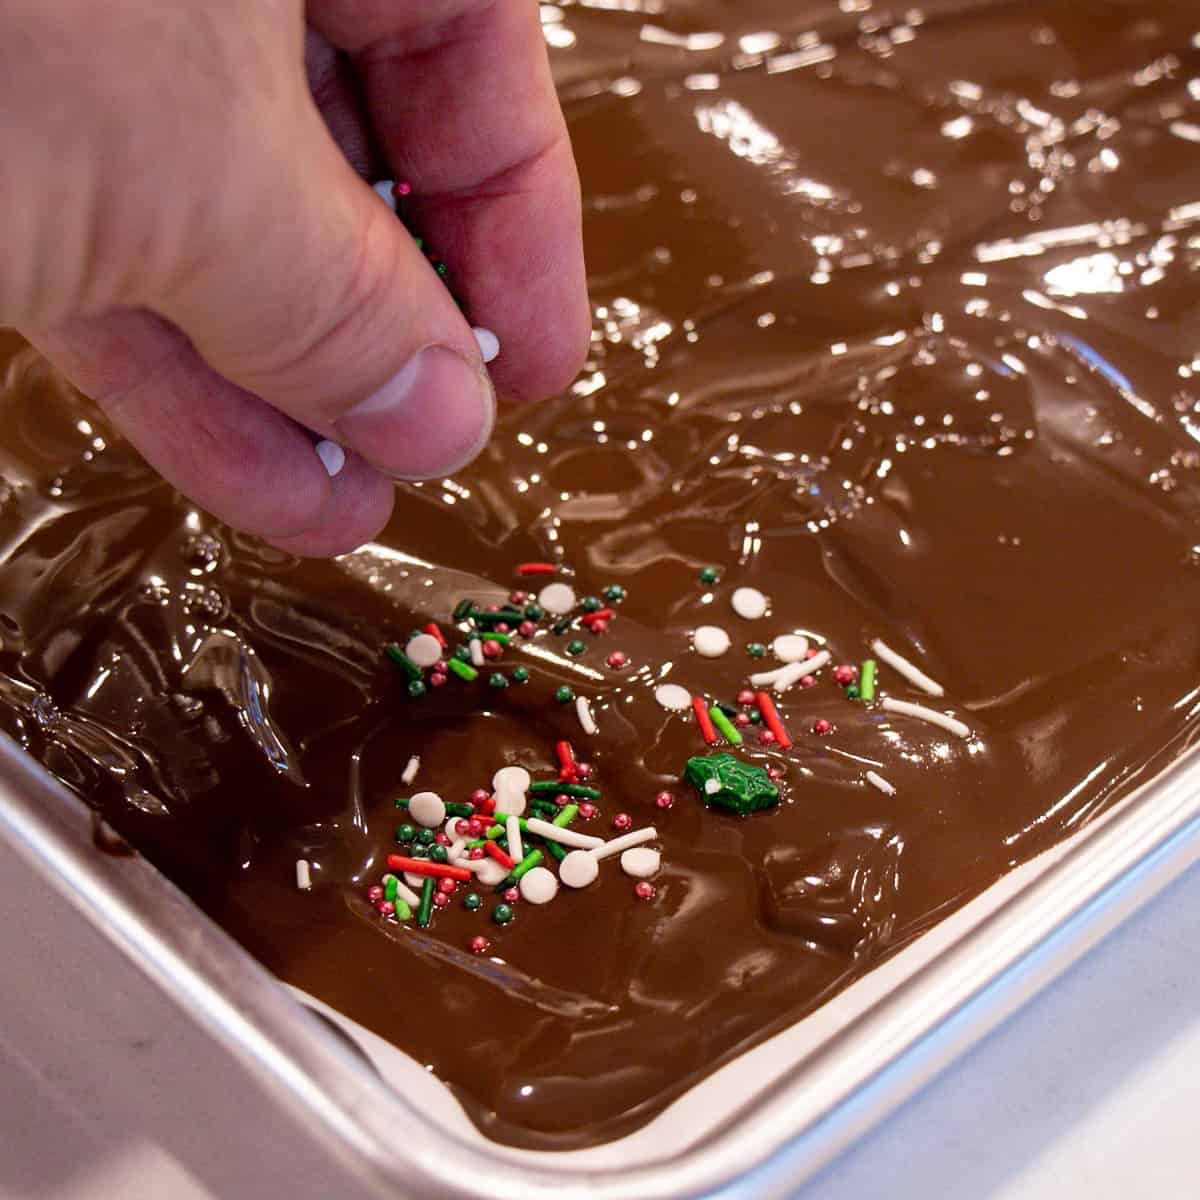 Christmas candy sprinkles placed on top of the chocolate.